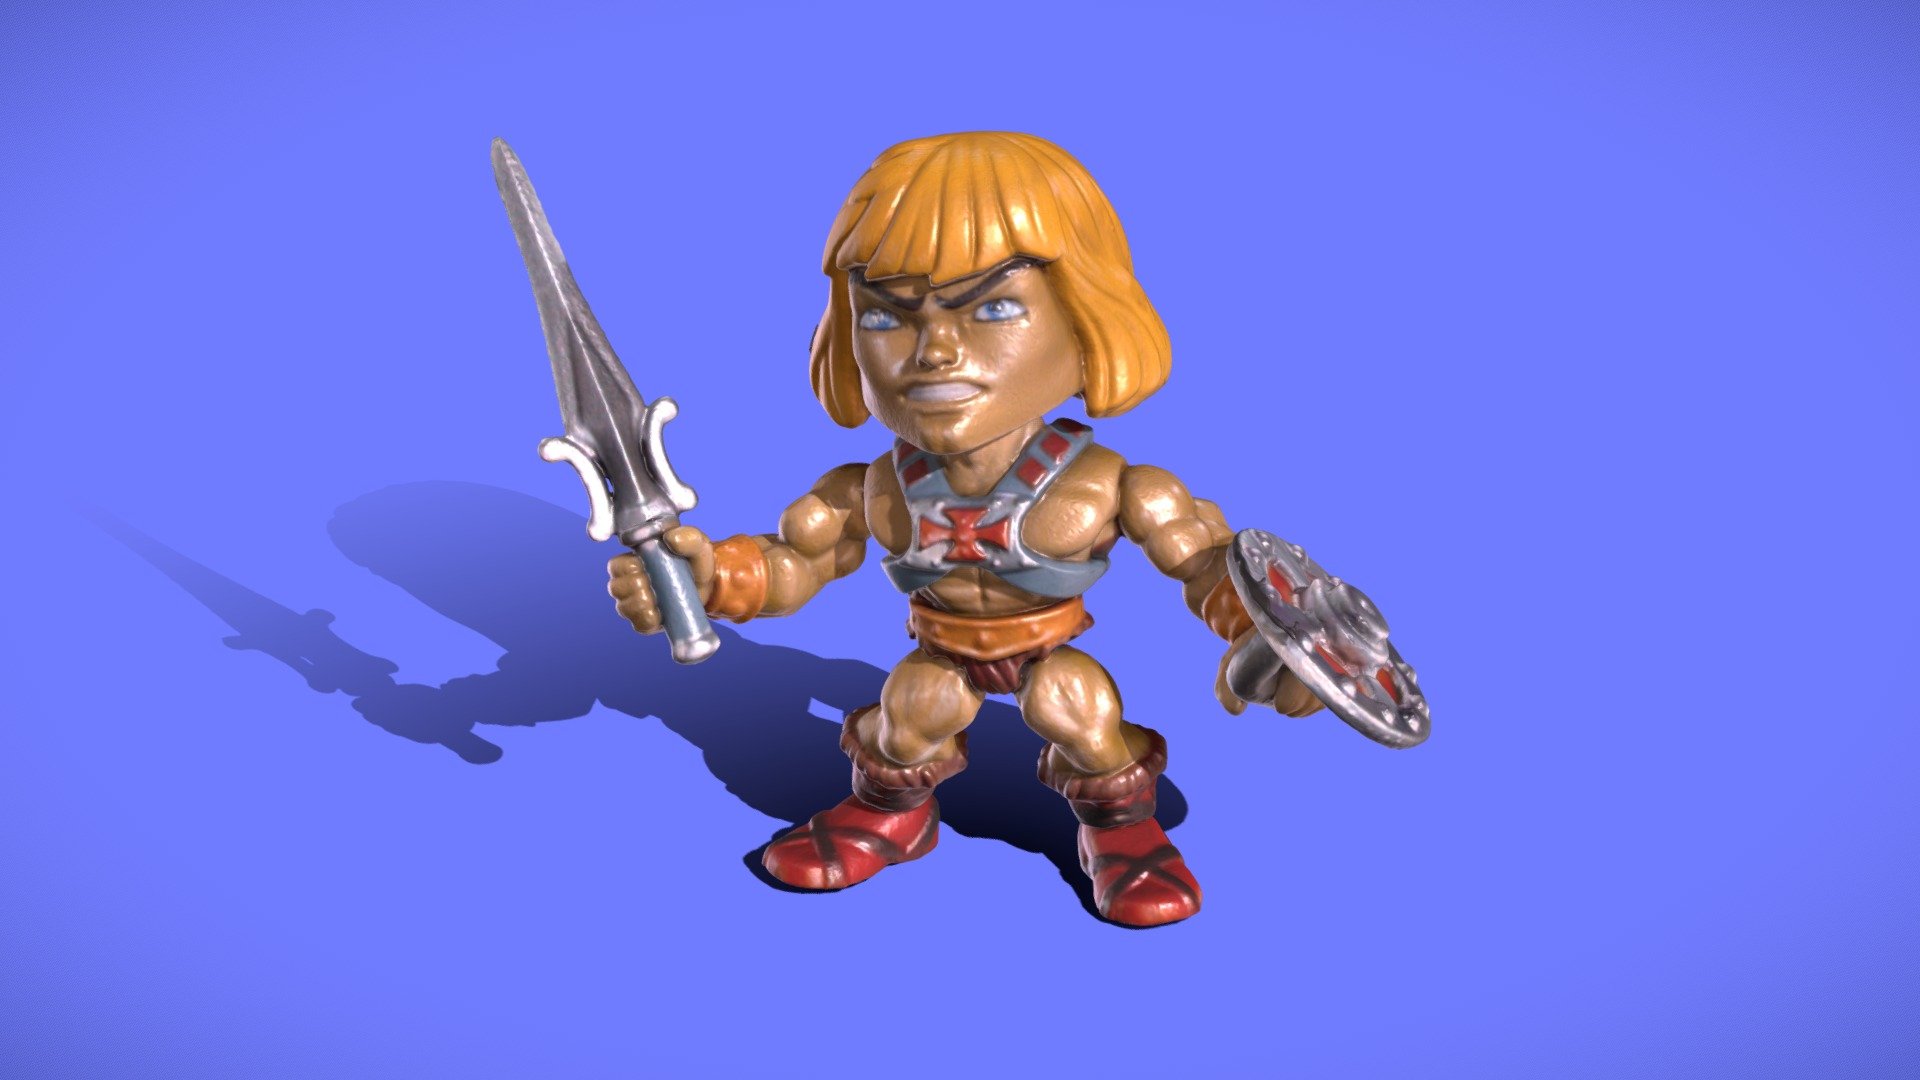 He-man Stylized Minifigure - 3D SCAN

For more models, follow: https://www.instagram.com/3dscanvault

THIS IS A SOLID HIGH QUALITY 3D SCAN, PERFECT FOR 3D PRINTING.

SLICCING / EDITION / REFING / CUTTING / ETC IS BY THE BUYER.

WE CHARGE ONLY FOR THE 3D SCAN SERVICE ( MACHINE TIME, ELECTRICITY, ETC ).

ALL RIGHTS OF THE FIGURES ARE PROPERTY OF THEIR CREATORS/BRANDS.

YOU CAN HAVE THE VIRTUAL FILES, BUT DO NOT PRINT IT AND SELL WITHOUT CREATORS AUTHORIZATION 3d model